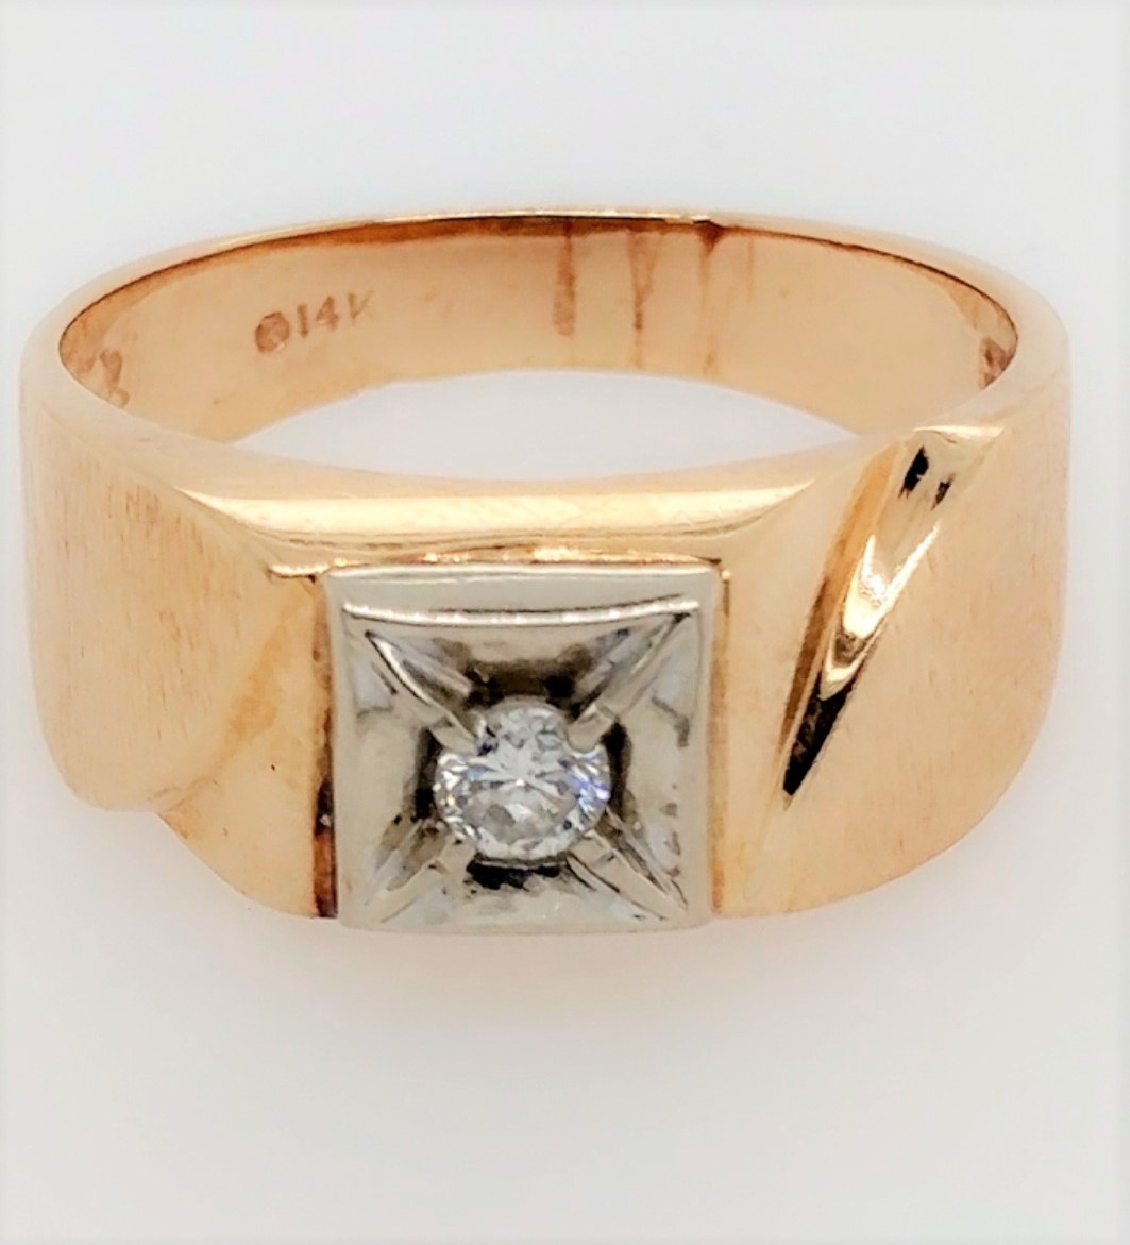 14K Yellow Gold Men s Ring with Diamond Accent
0.12CT
Size 10.5